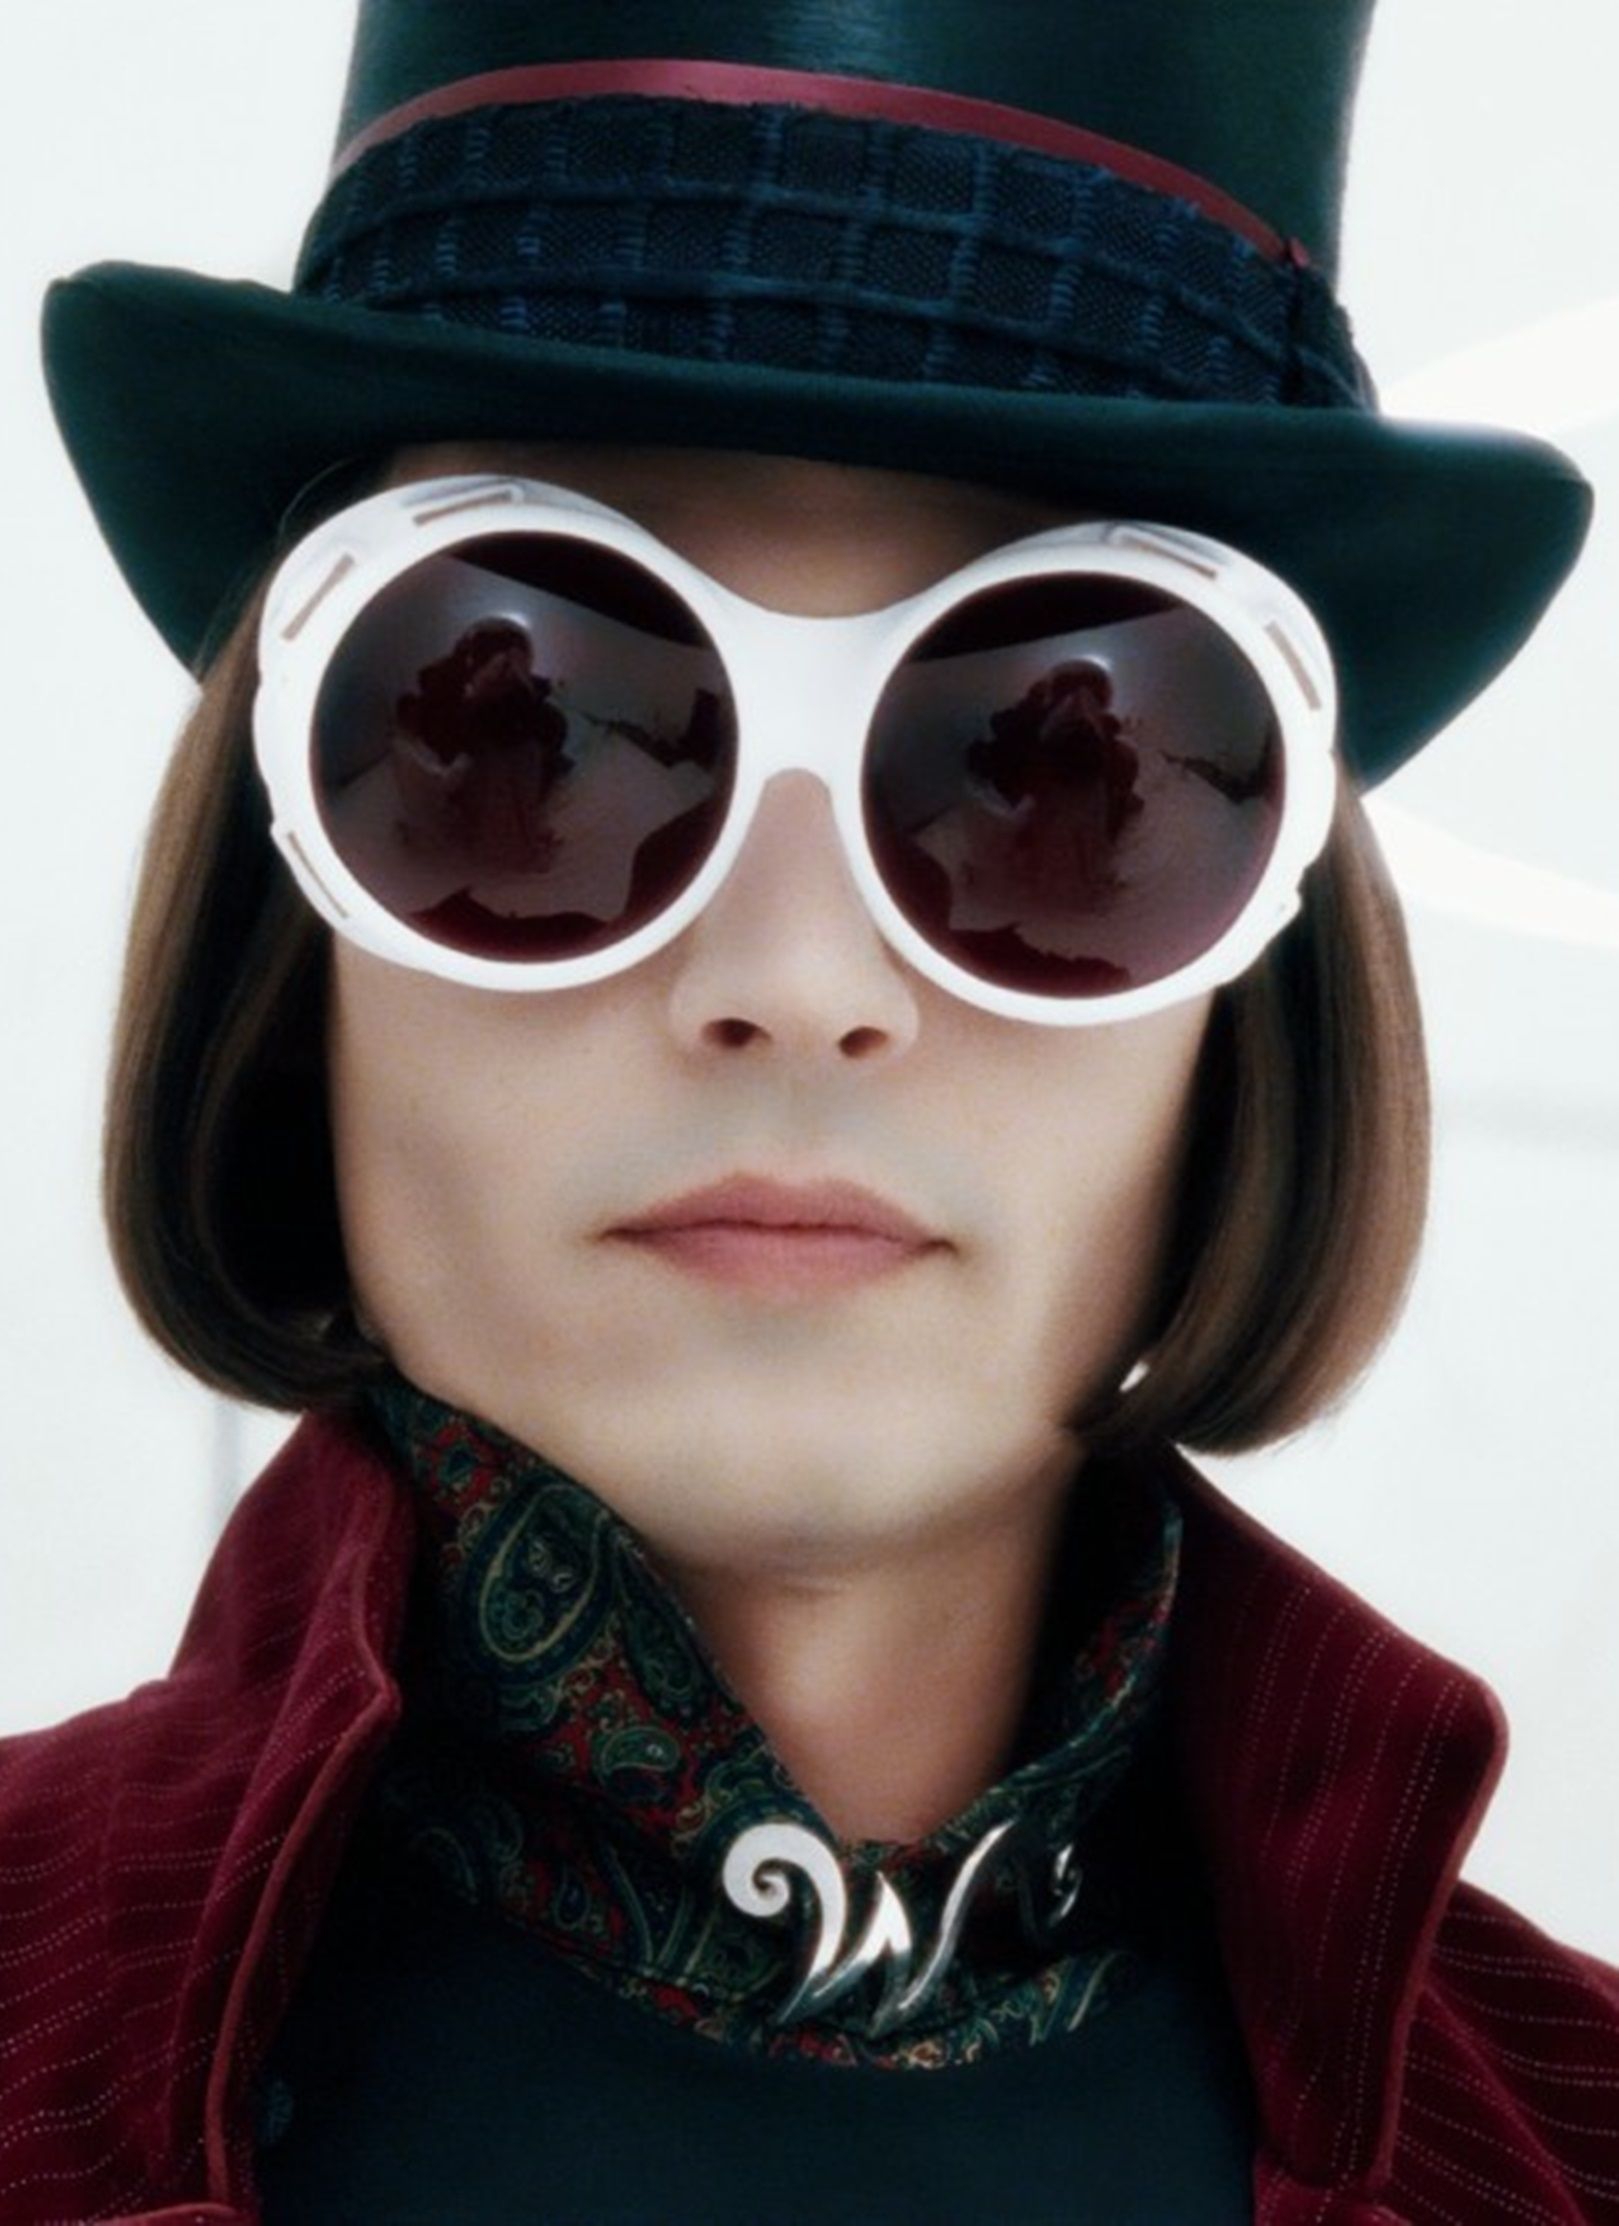 https://static.wikia.nocookie.net/catcf/images/5/58/Willy_Wonka.jpg/revision/latest?cb=20200822125043